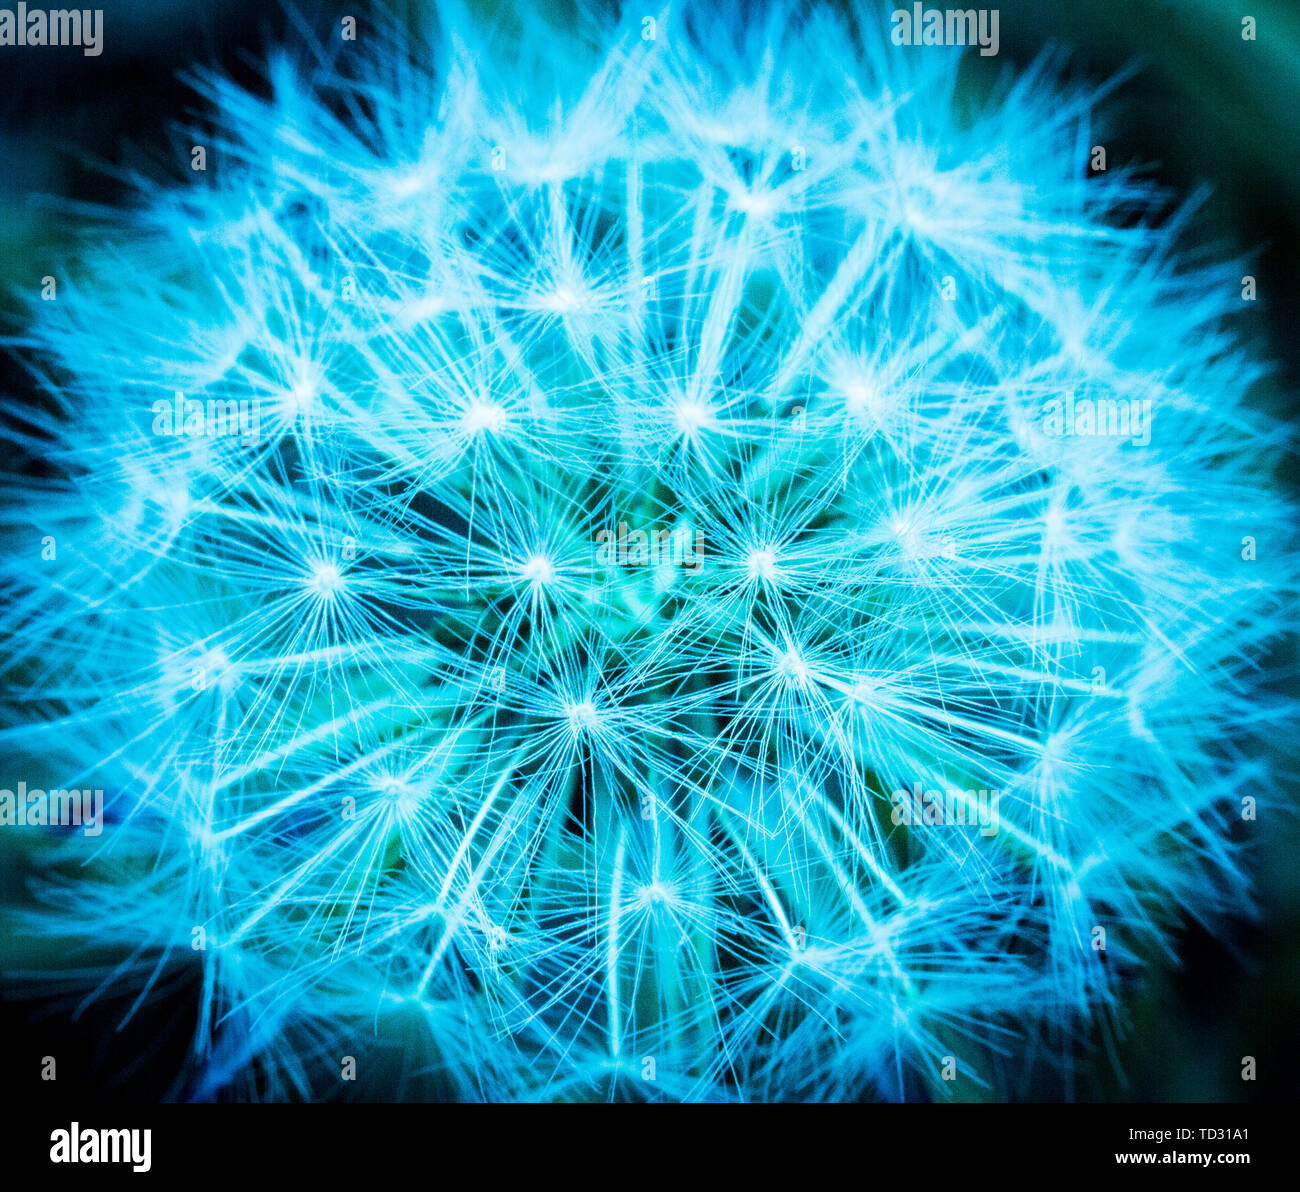 Macro, close-up photography of dandelion clock in neon blue, turquoise, teal color. Stock Photo